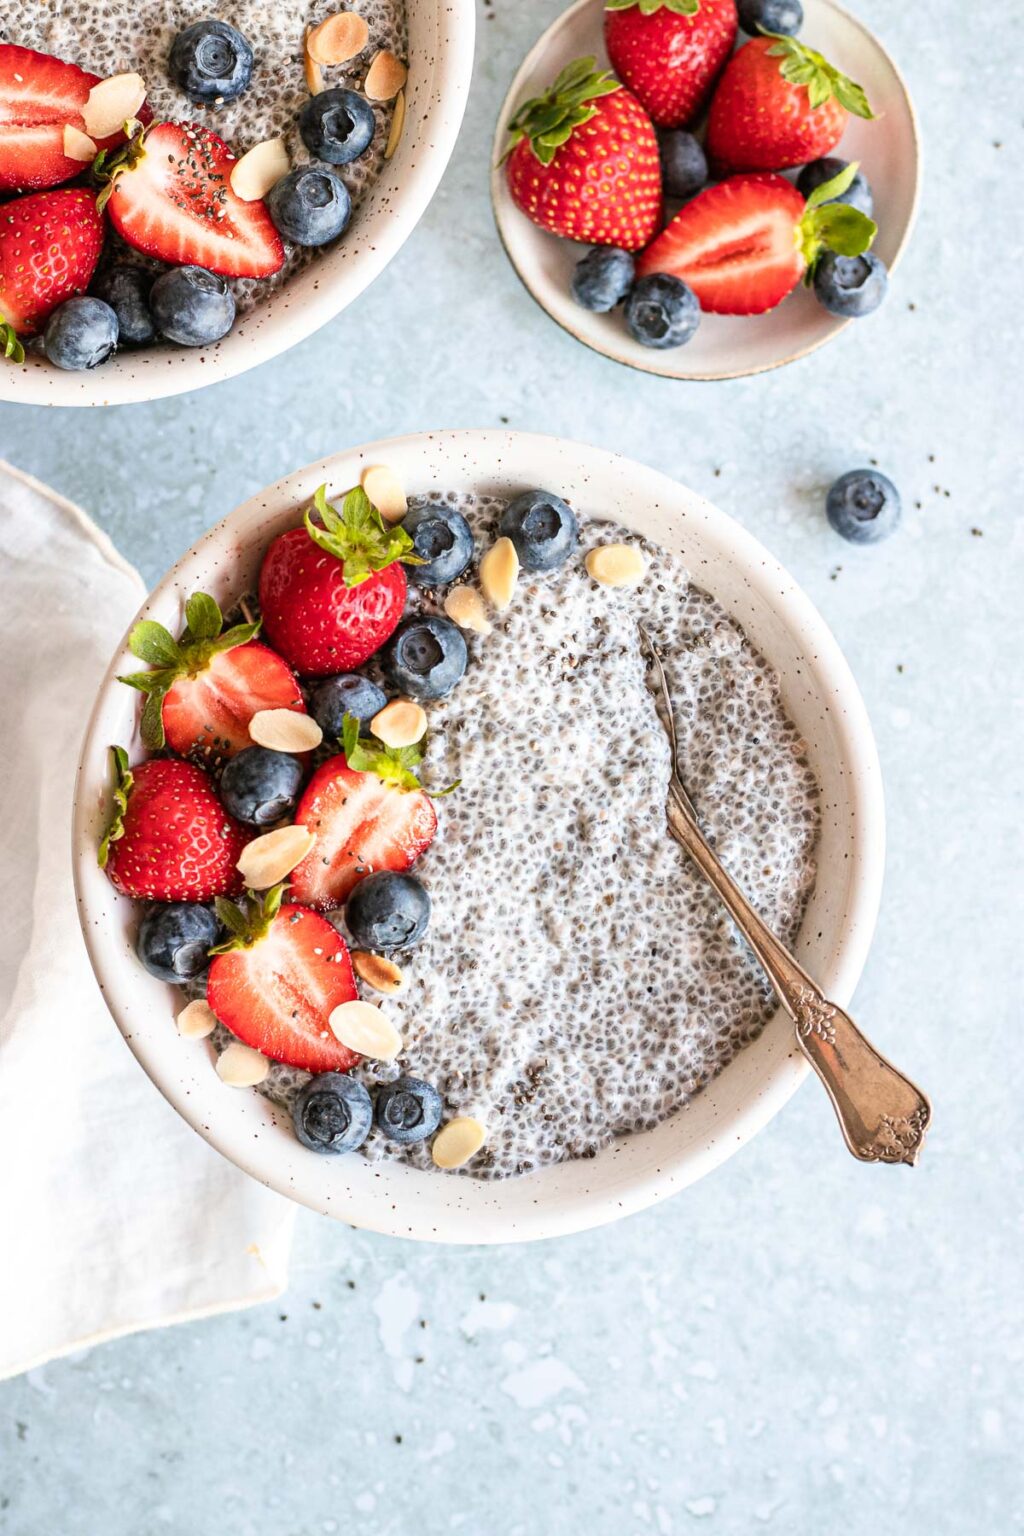 Chia Pudding Recipe- Cooking Made Healthy